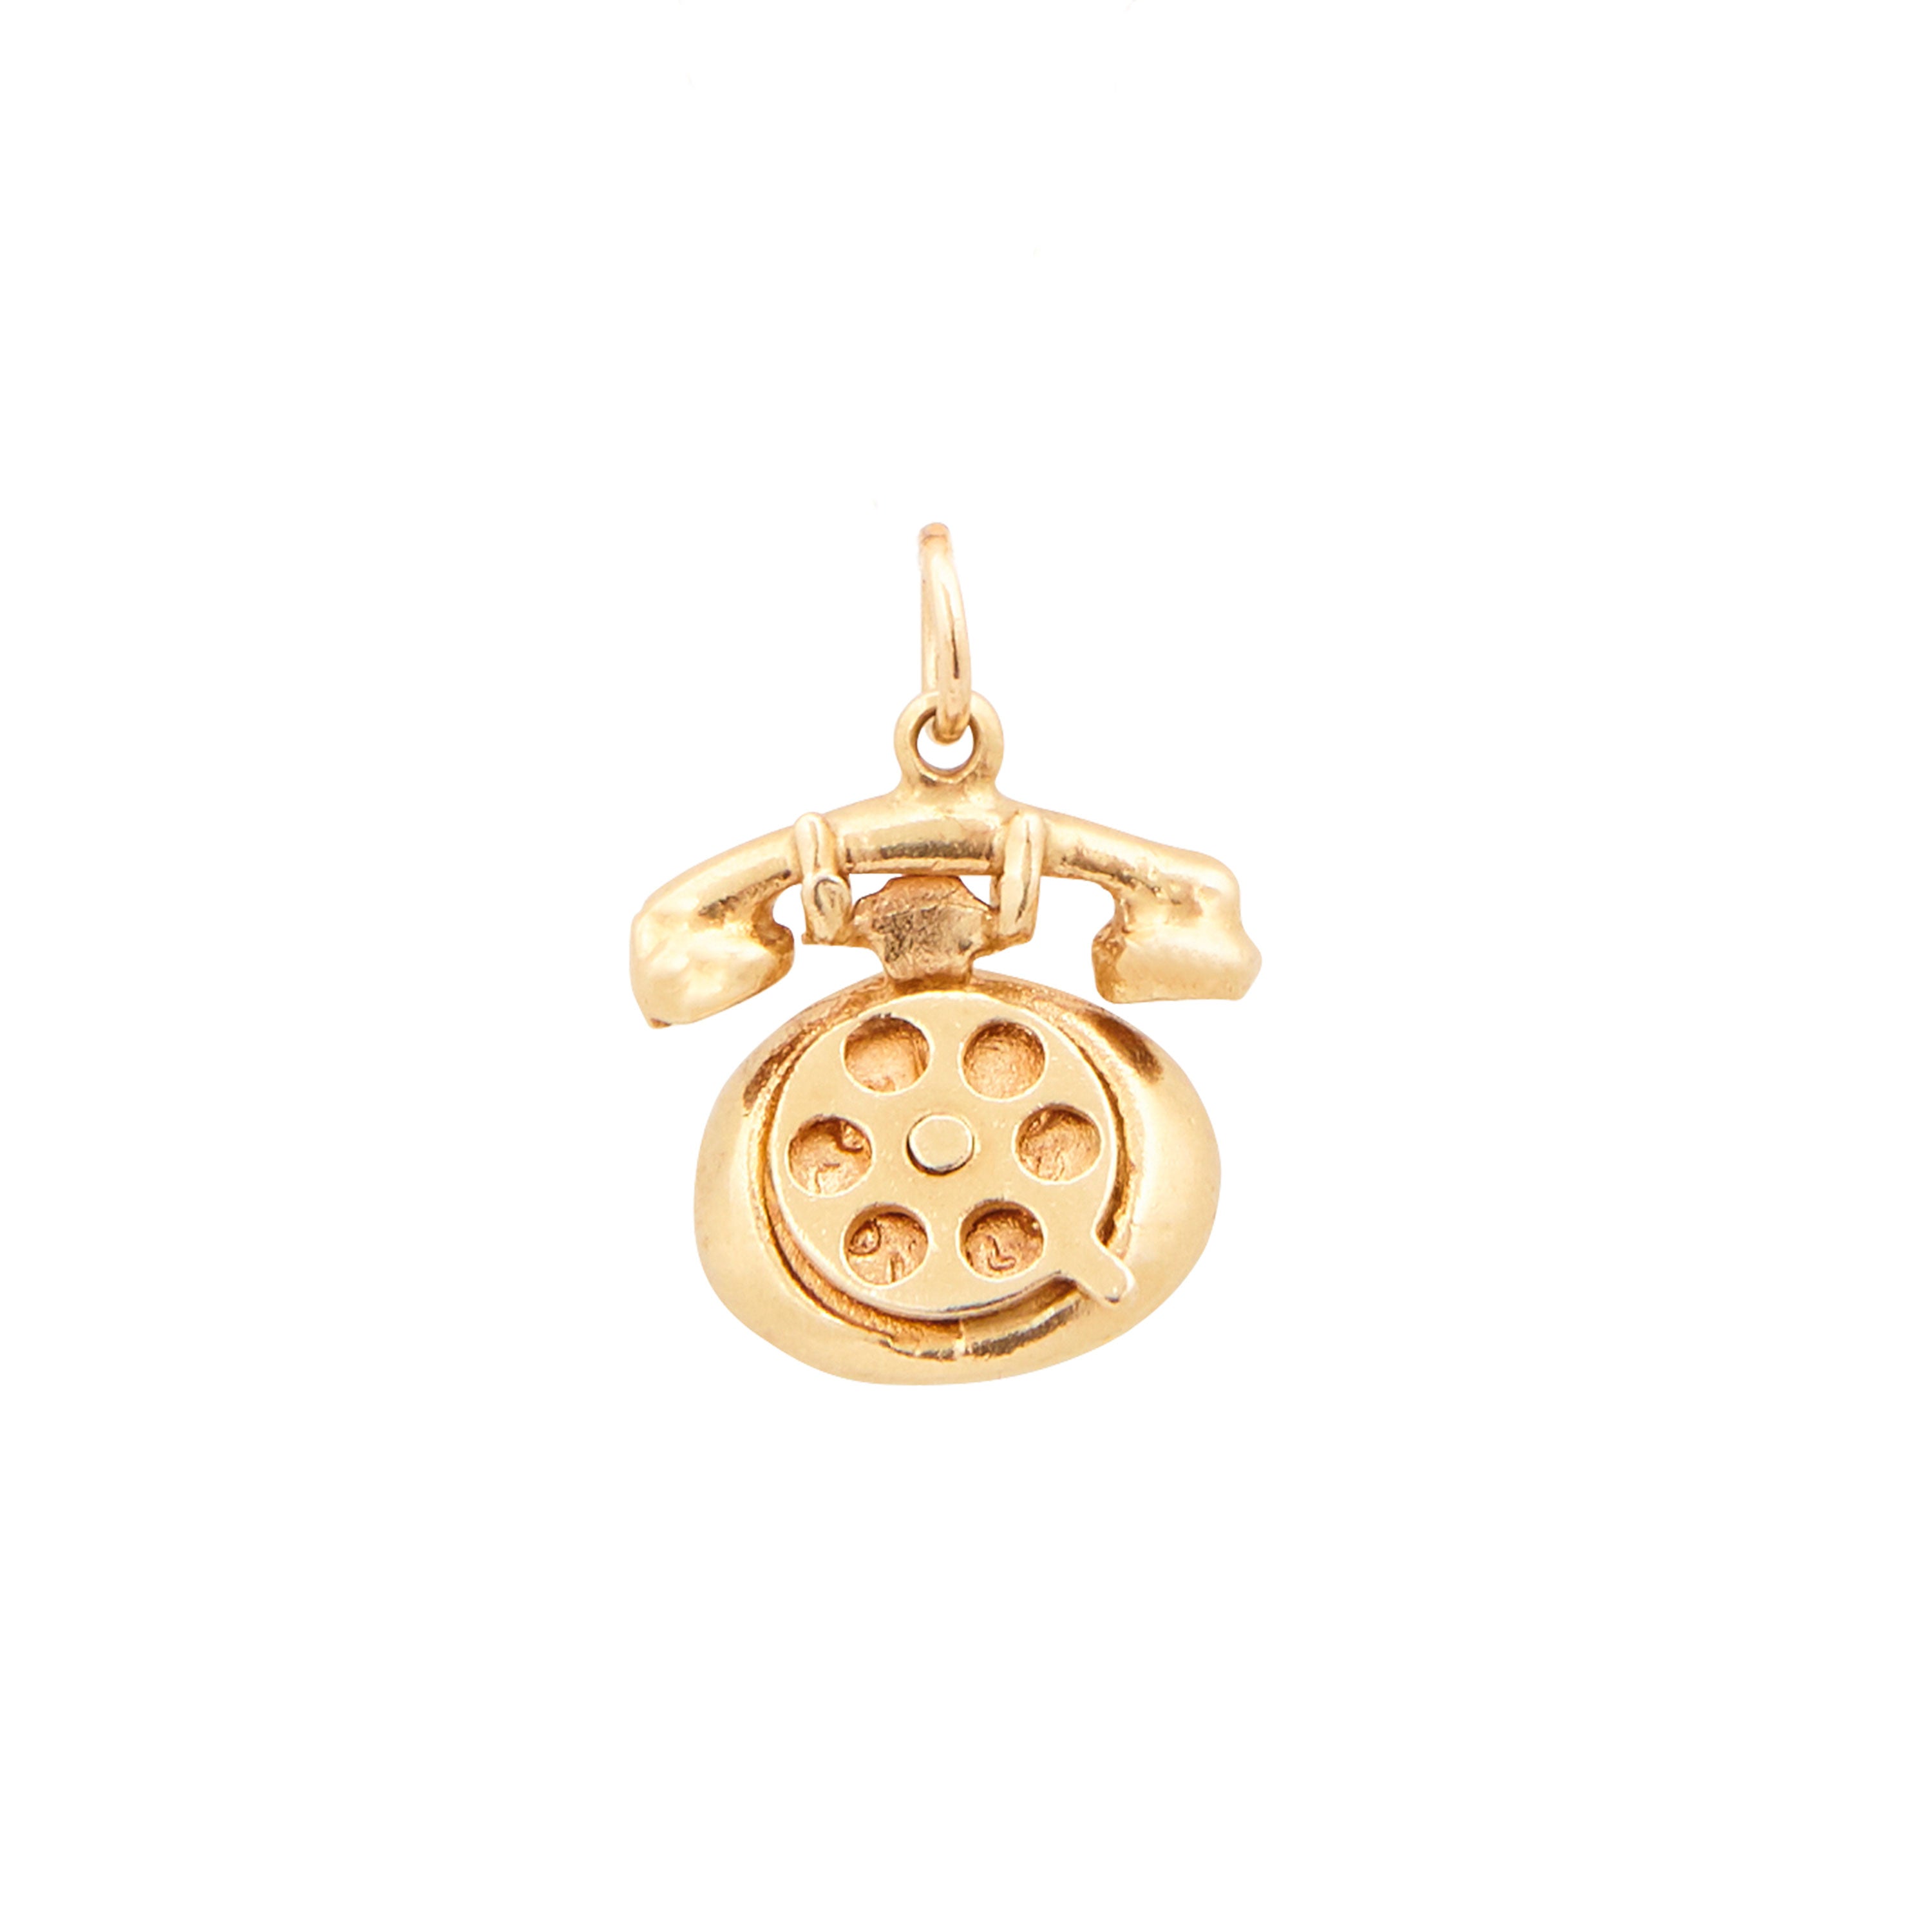 Movable Rotary Phone 14K Gold Charm